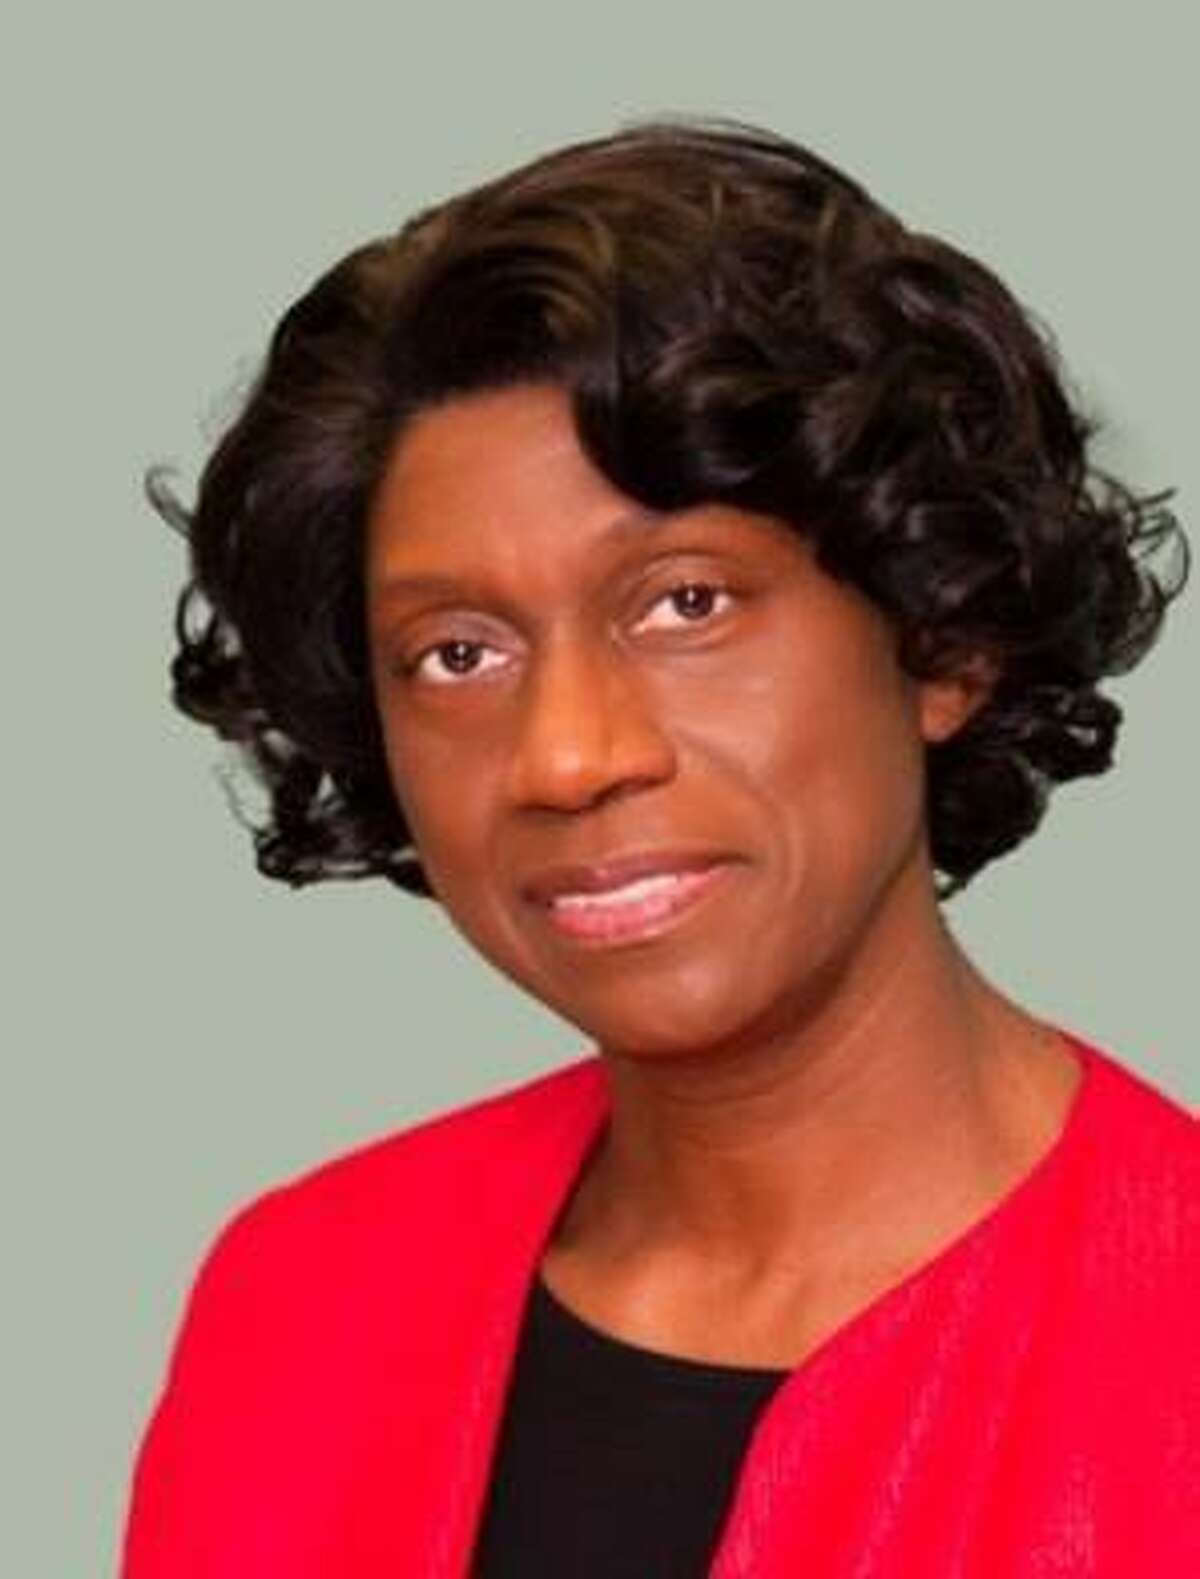 Charlene Russell-Tucker replaces Miguel Cardona, appointed to secretary of the U.S. Department of Education, as commissioner of the Connecticut Department of Education.